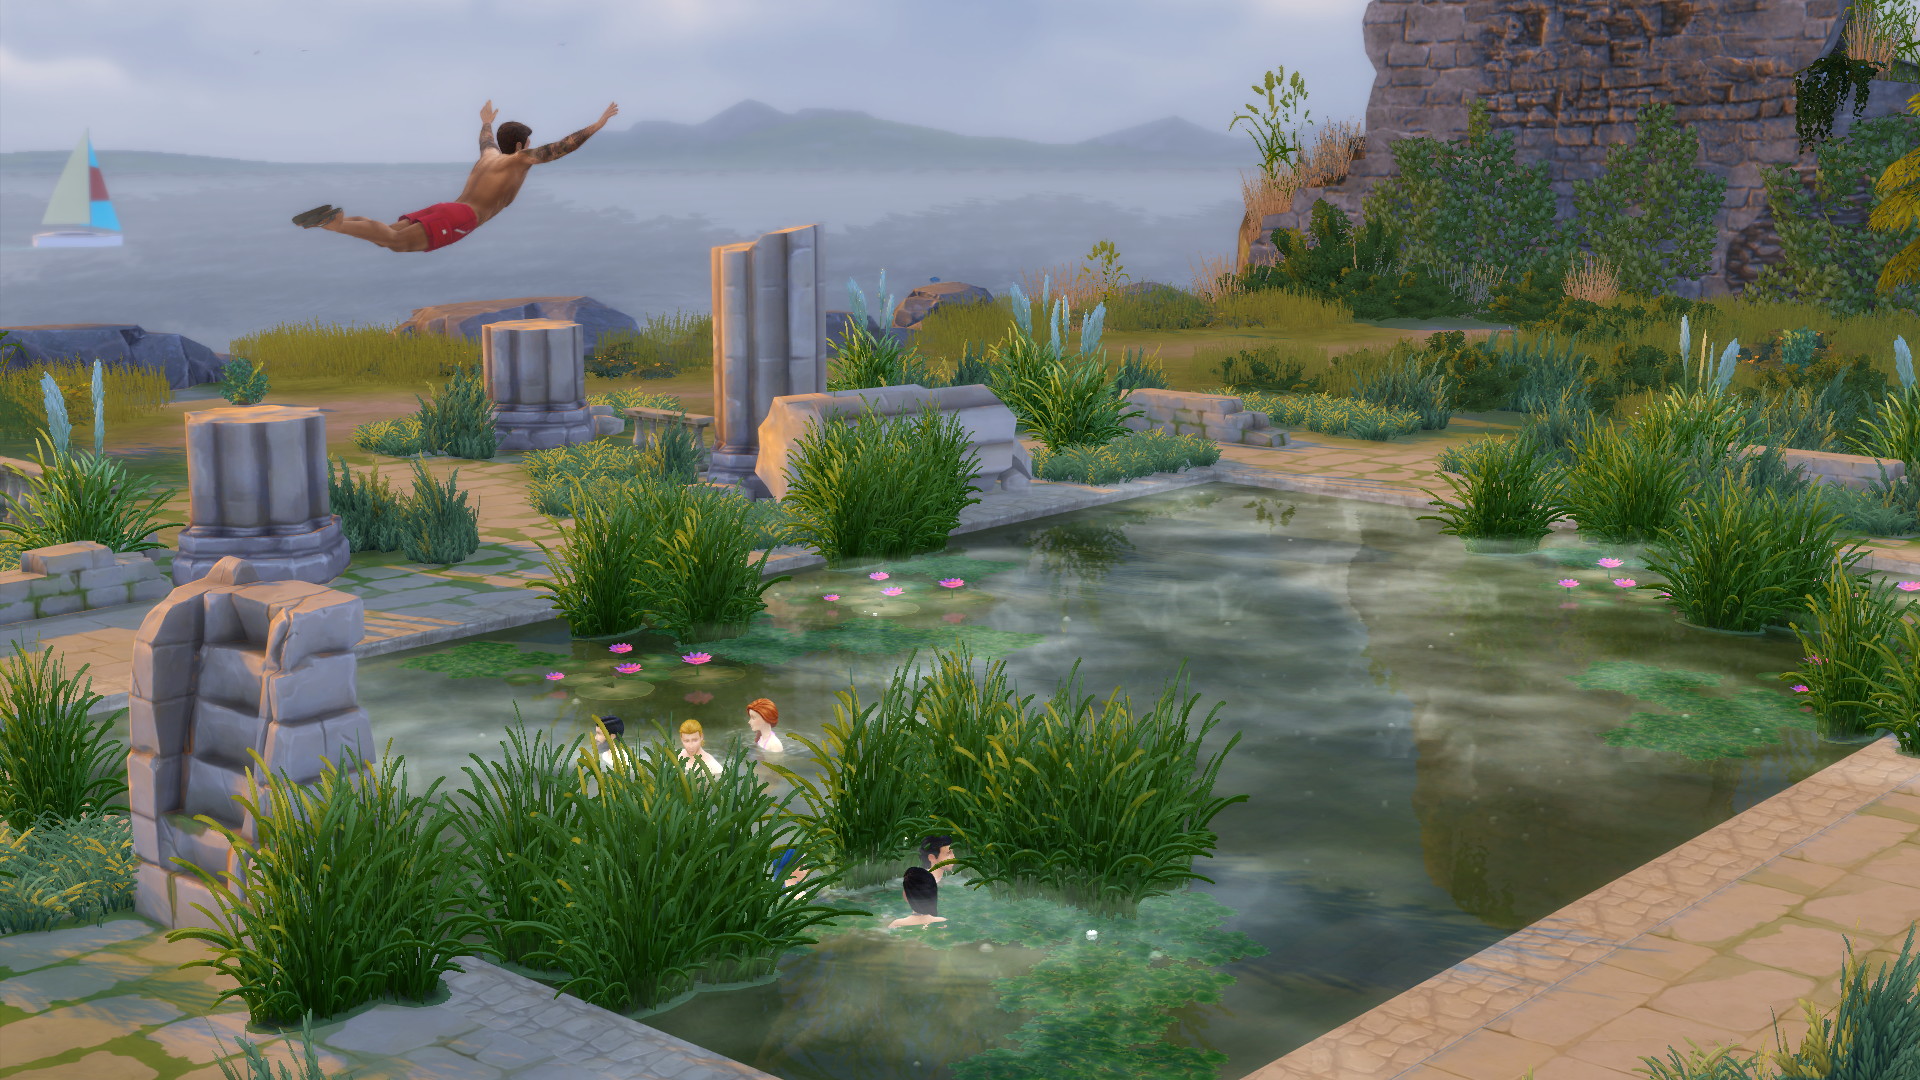 The Sims 4: Get Together - screenshot 2